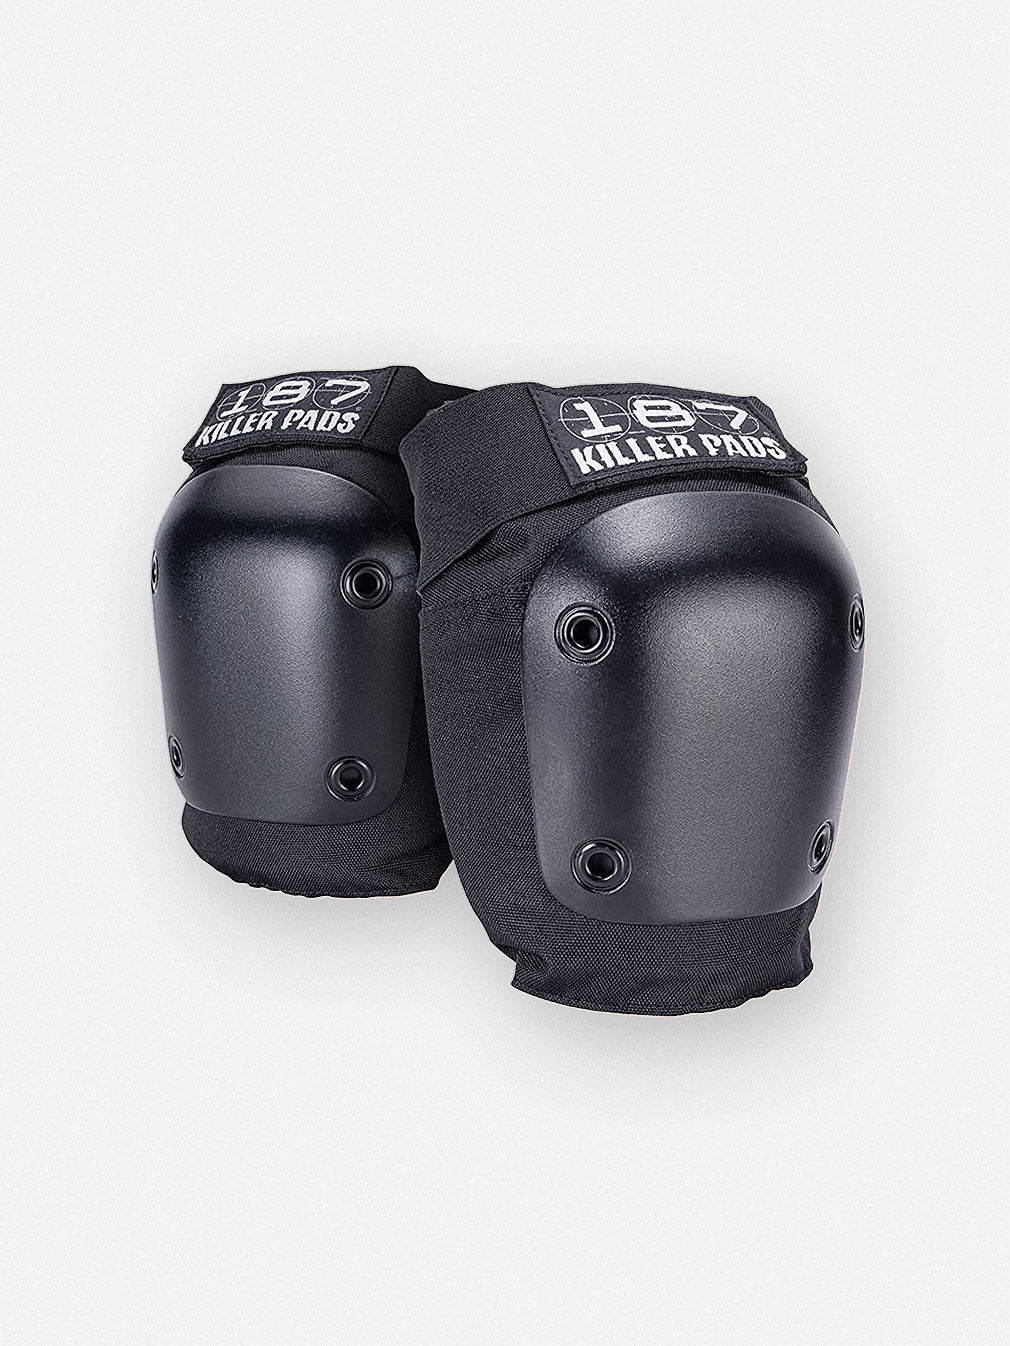 187 Killer Pads Adult Pro Knee Pads - Youth Lagoon